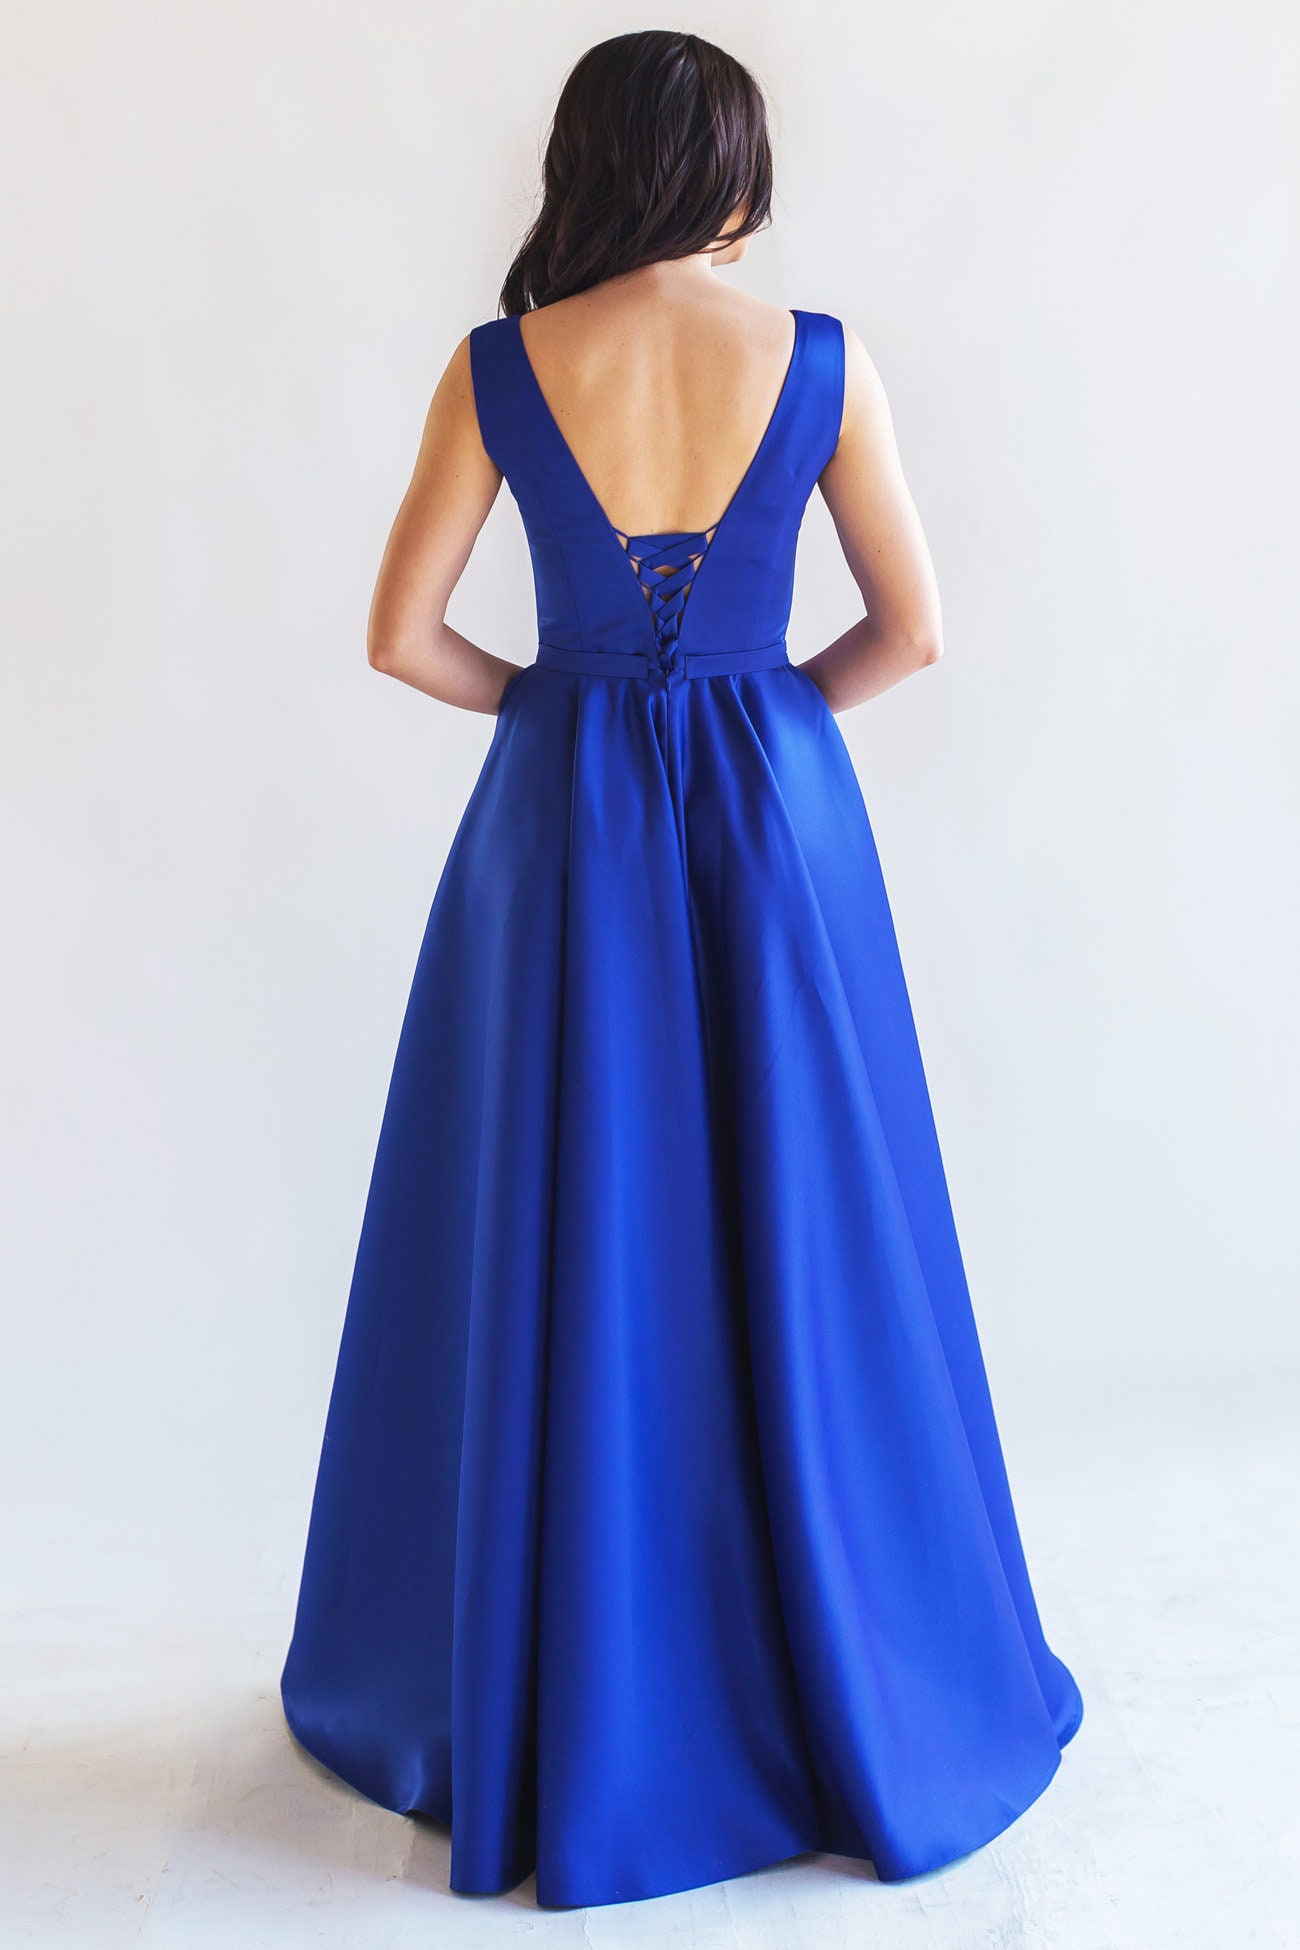 Blue Violet Satin Evening Dress With Corset Lace-up and Full - Etsy